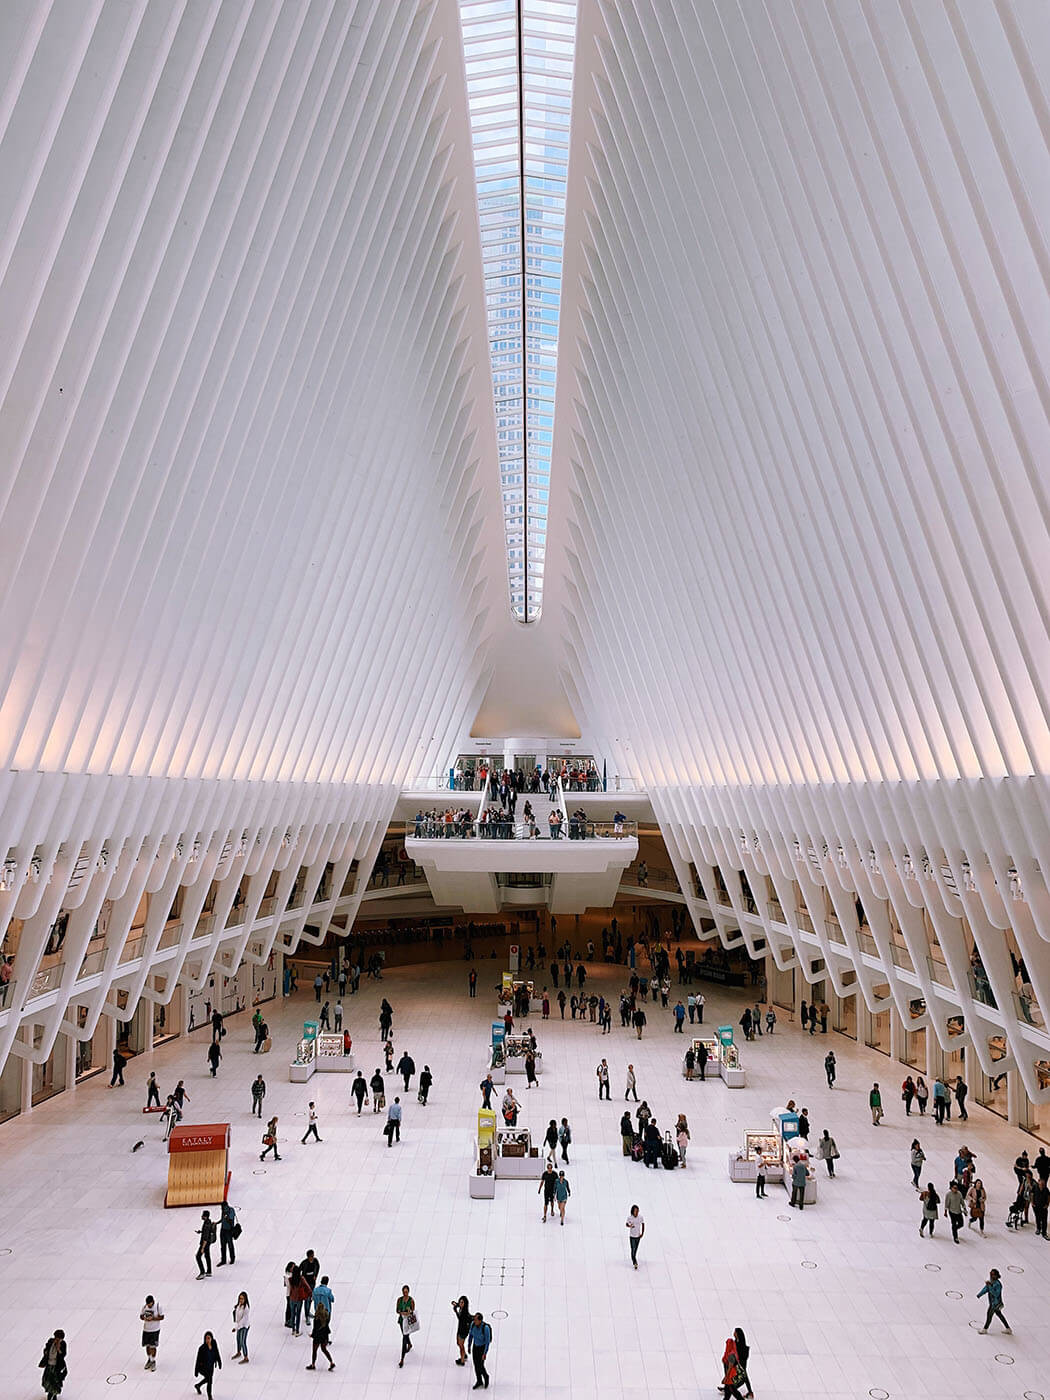 NYC Itinerary - The Oculus at One World Trade Center